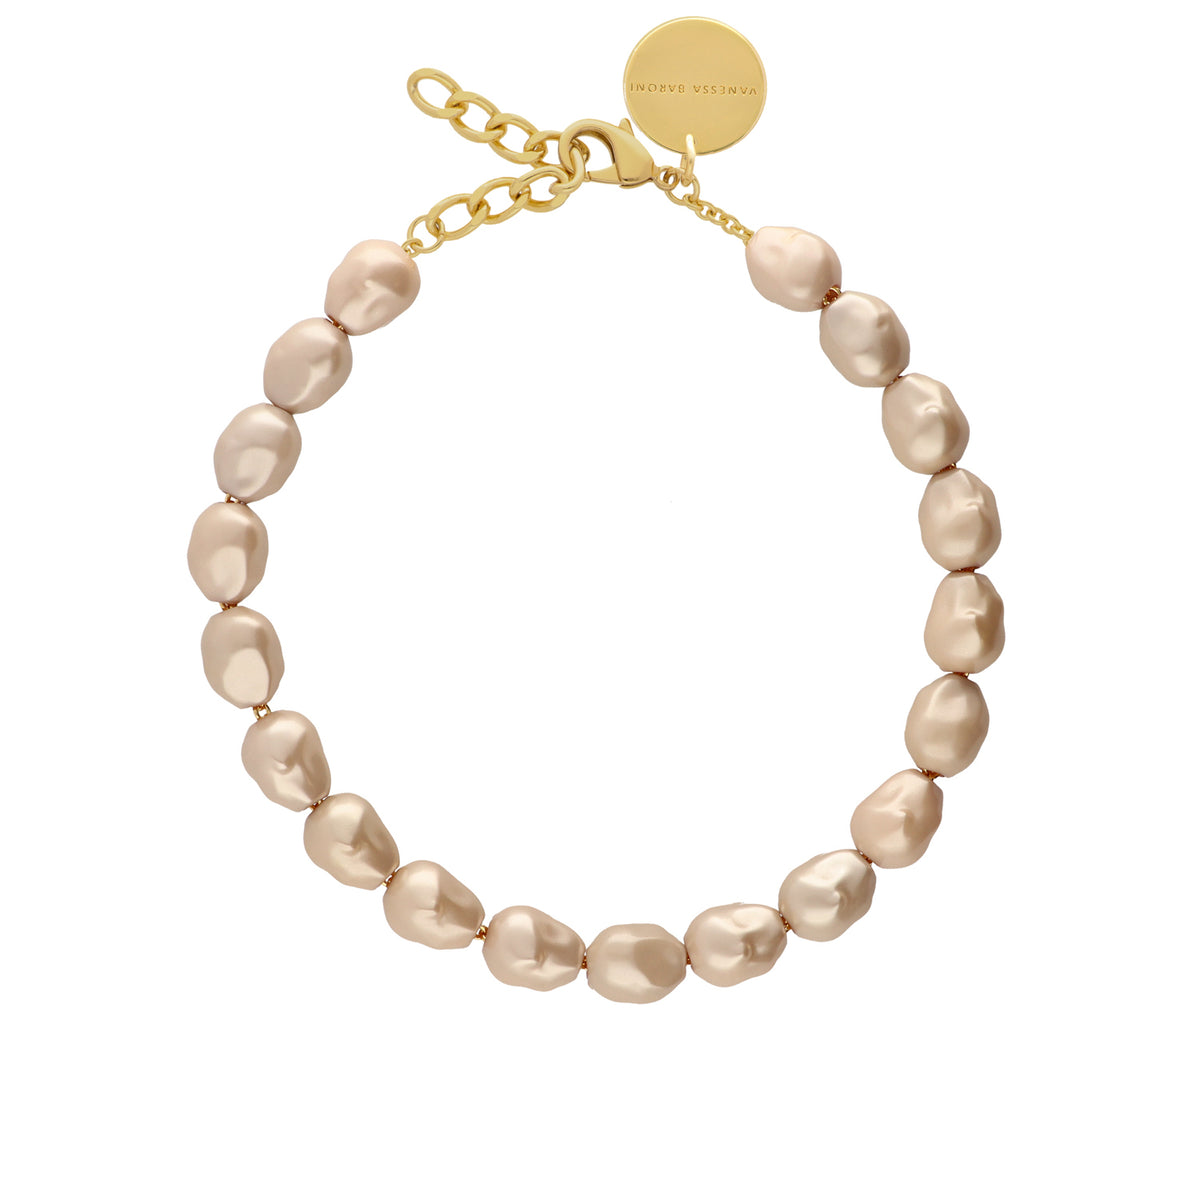 Organic Pearl Necklace Short Champagner Pearl